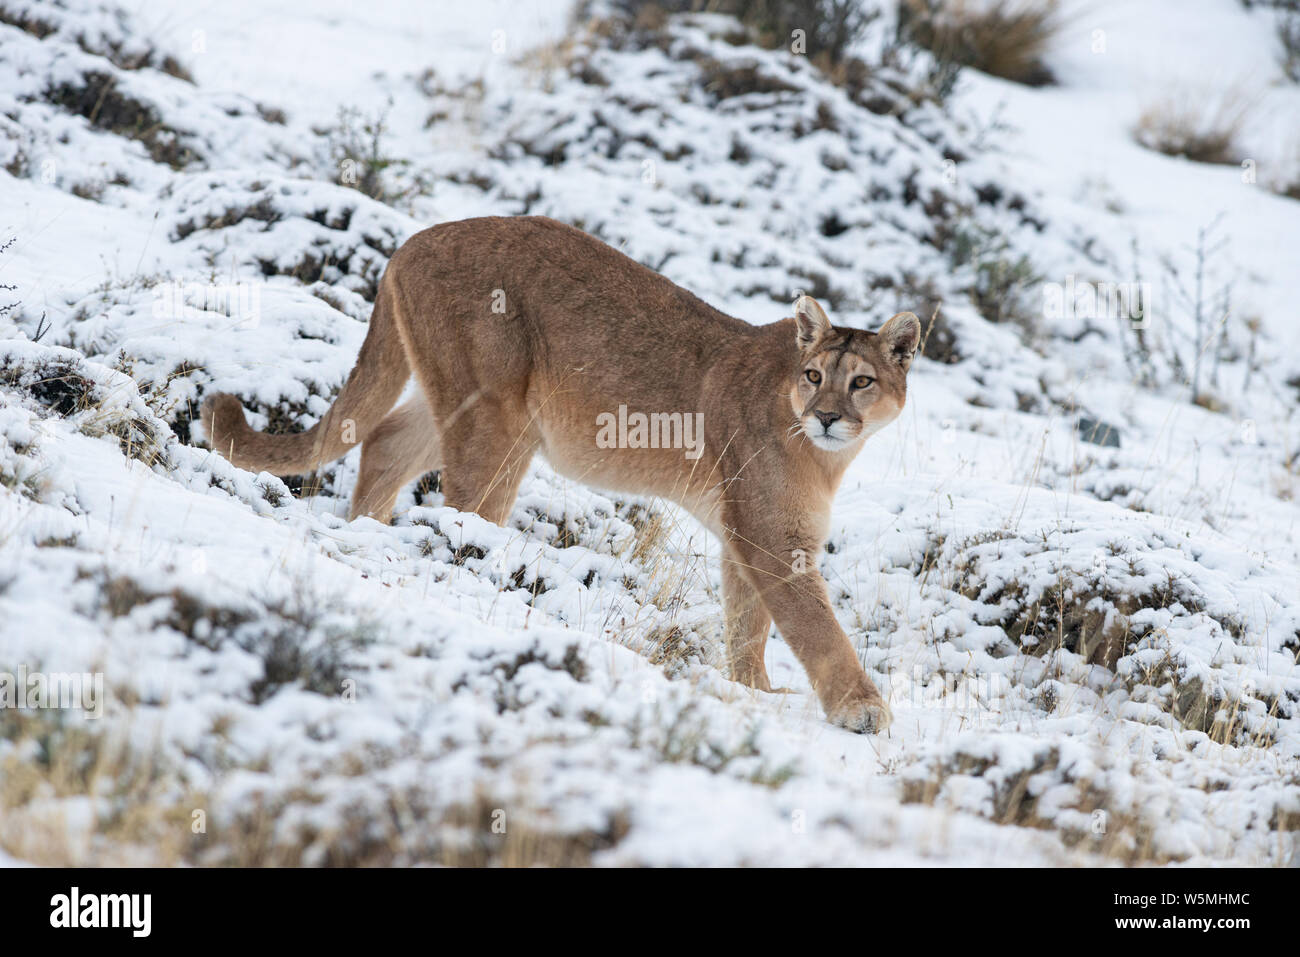 An adult female Puma (Puma concocolor) walking over snowy ground at Torres del Paine National Park, in Chile Stock Photo